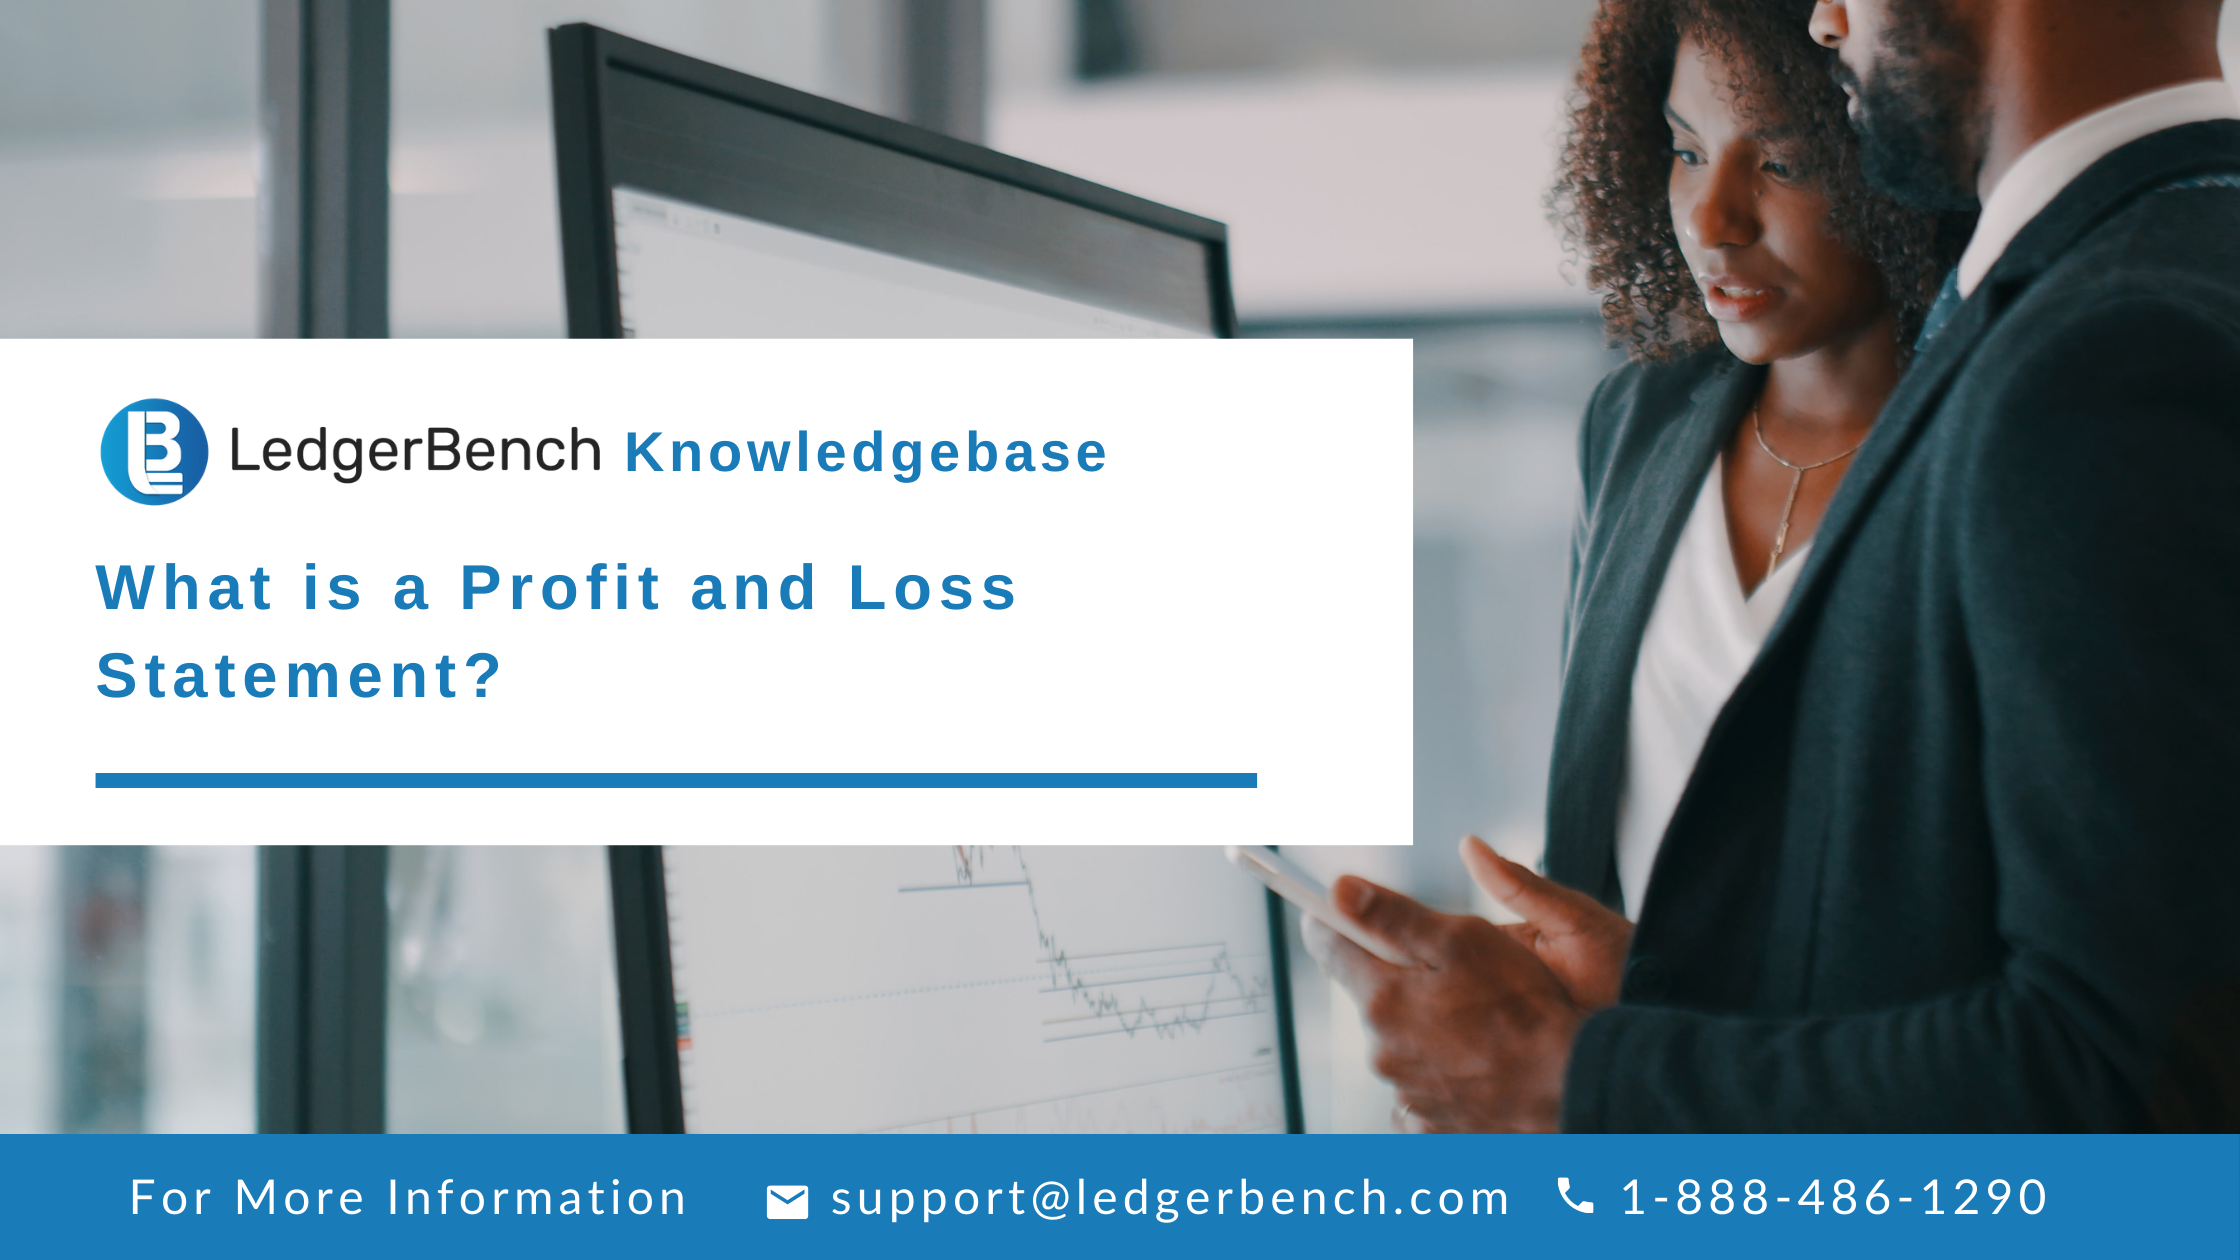 What is a Profit and Loss Statement